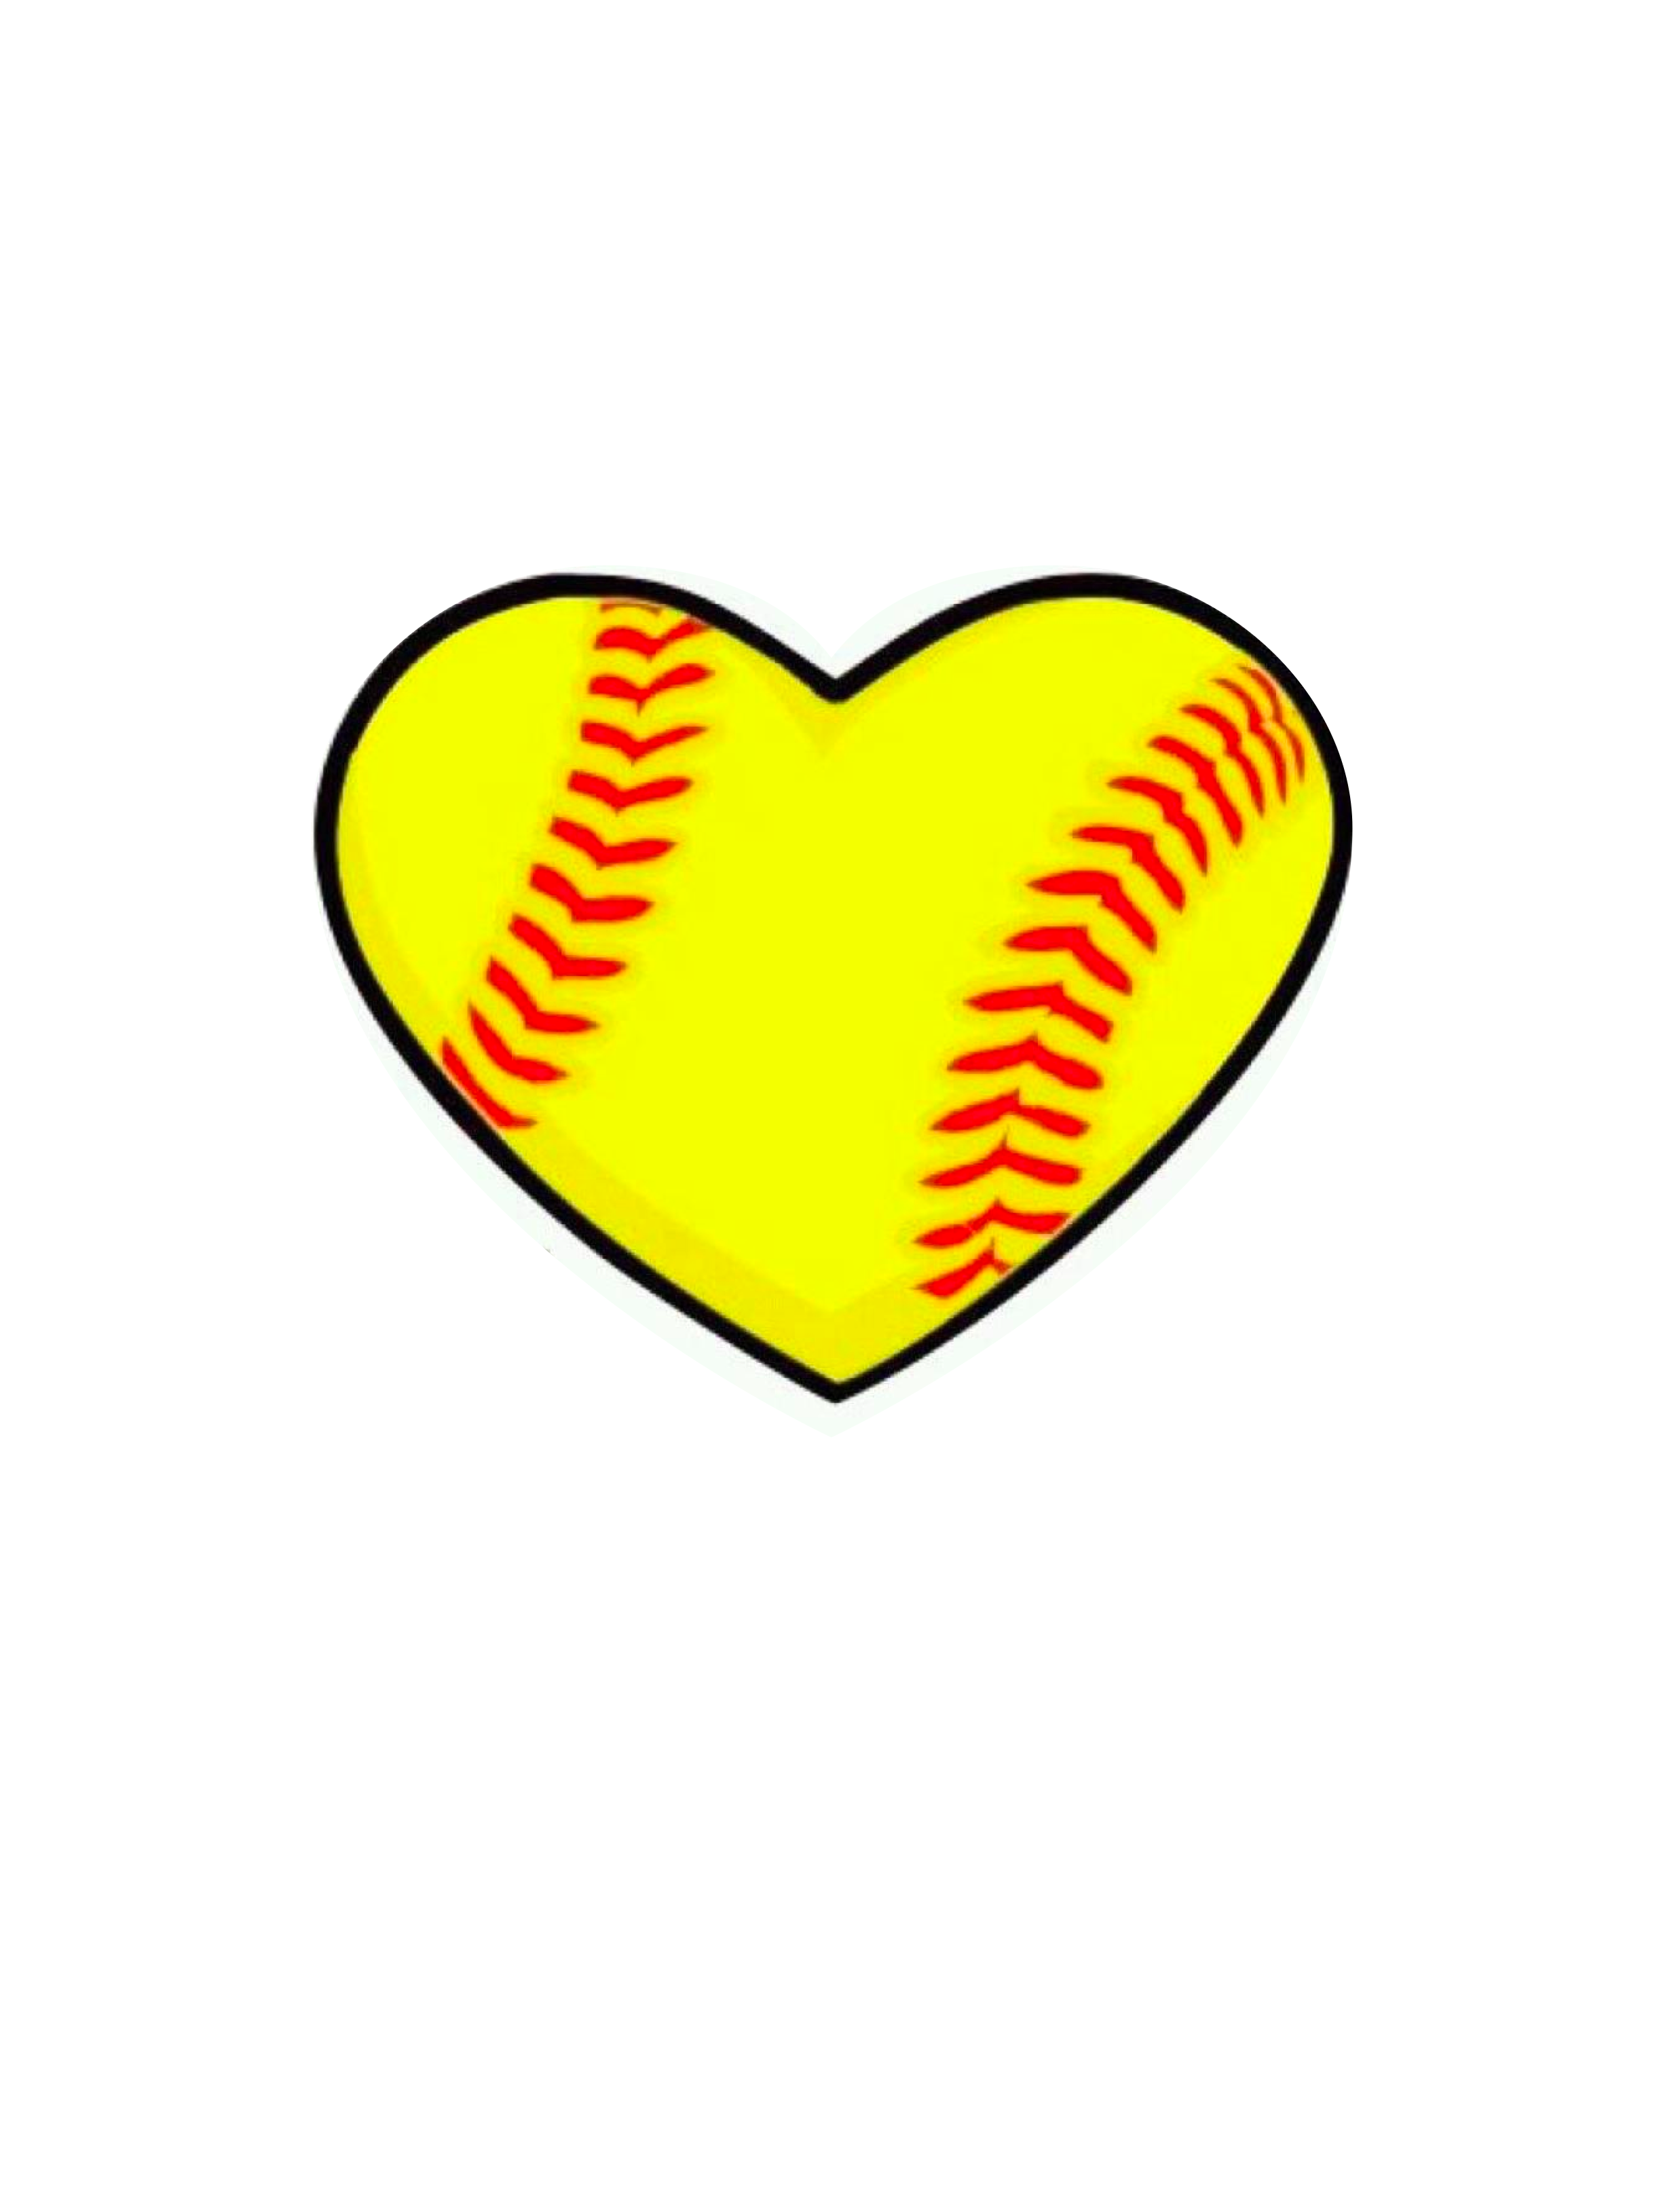 Animated Softball Pictures - ClipArt Best